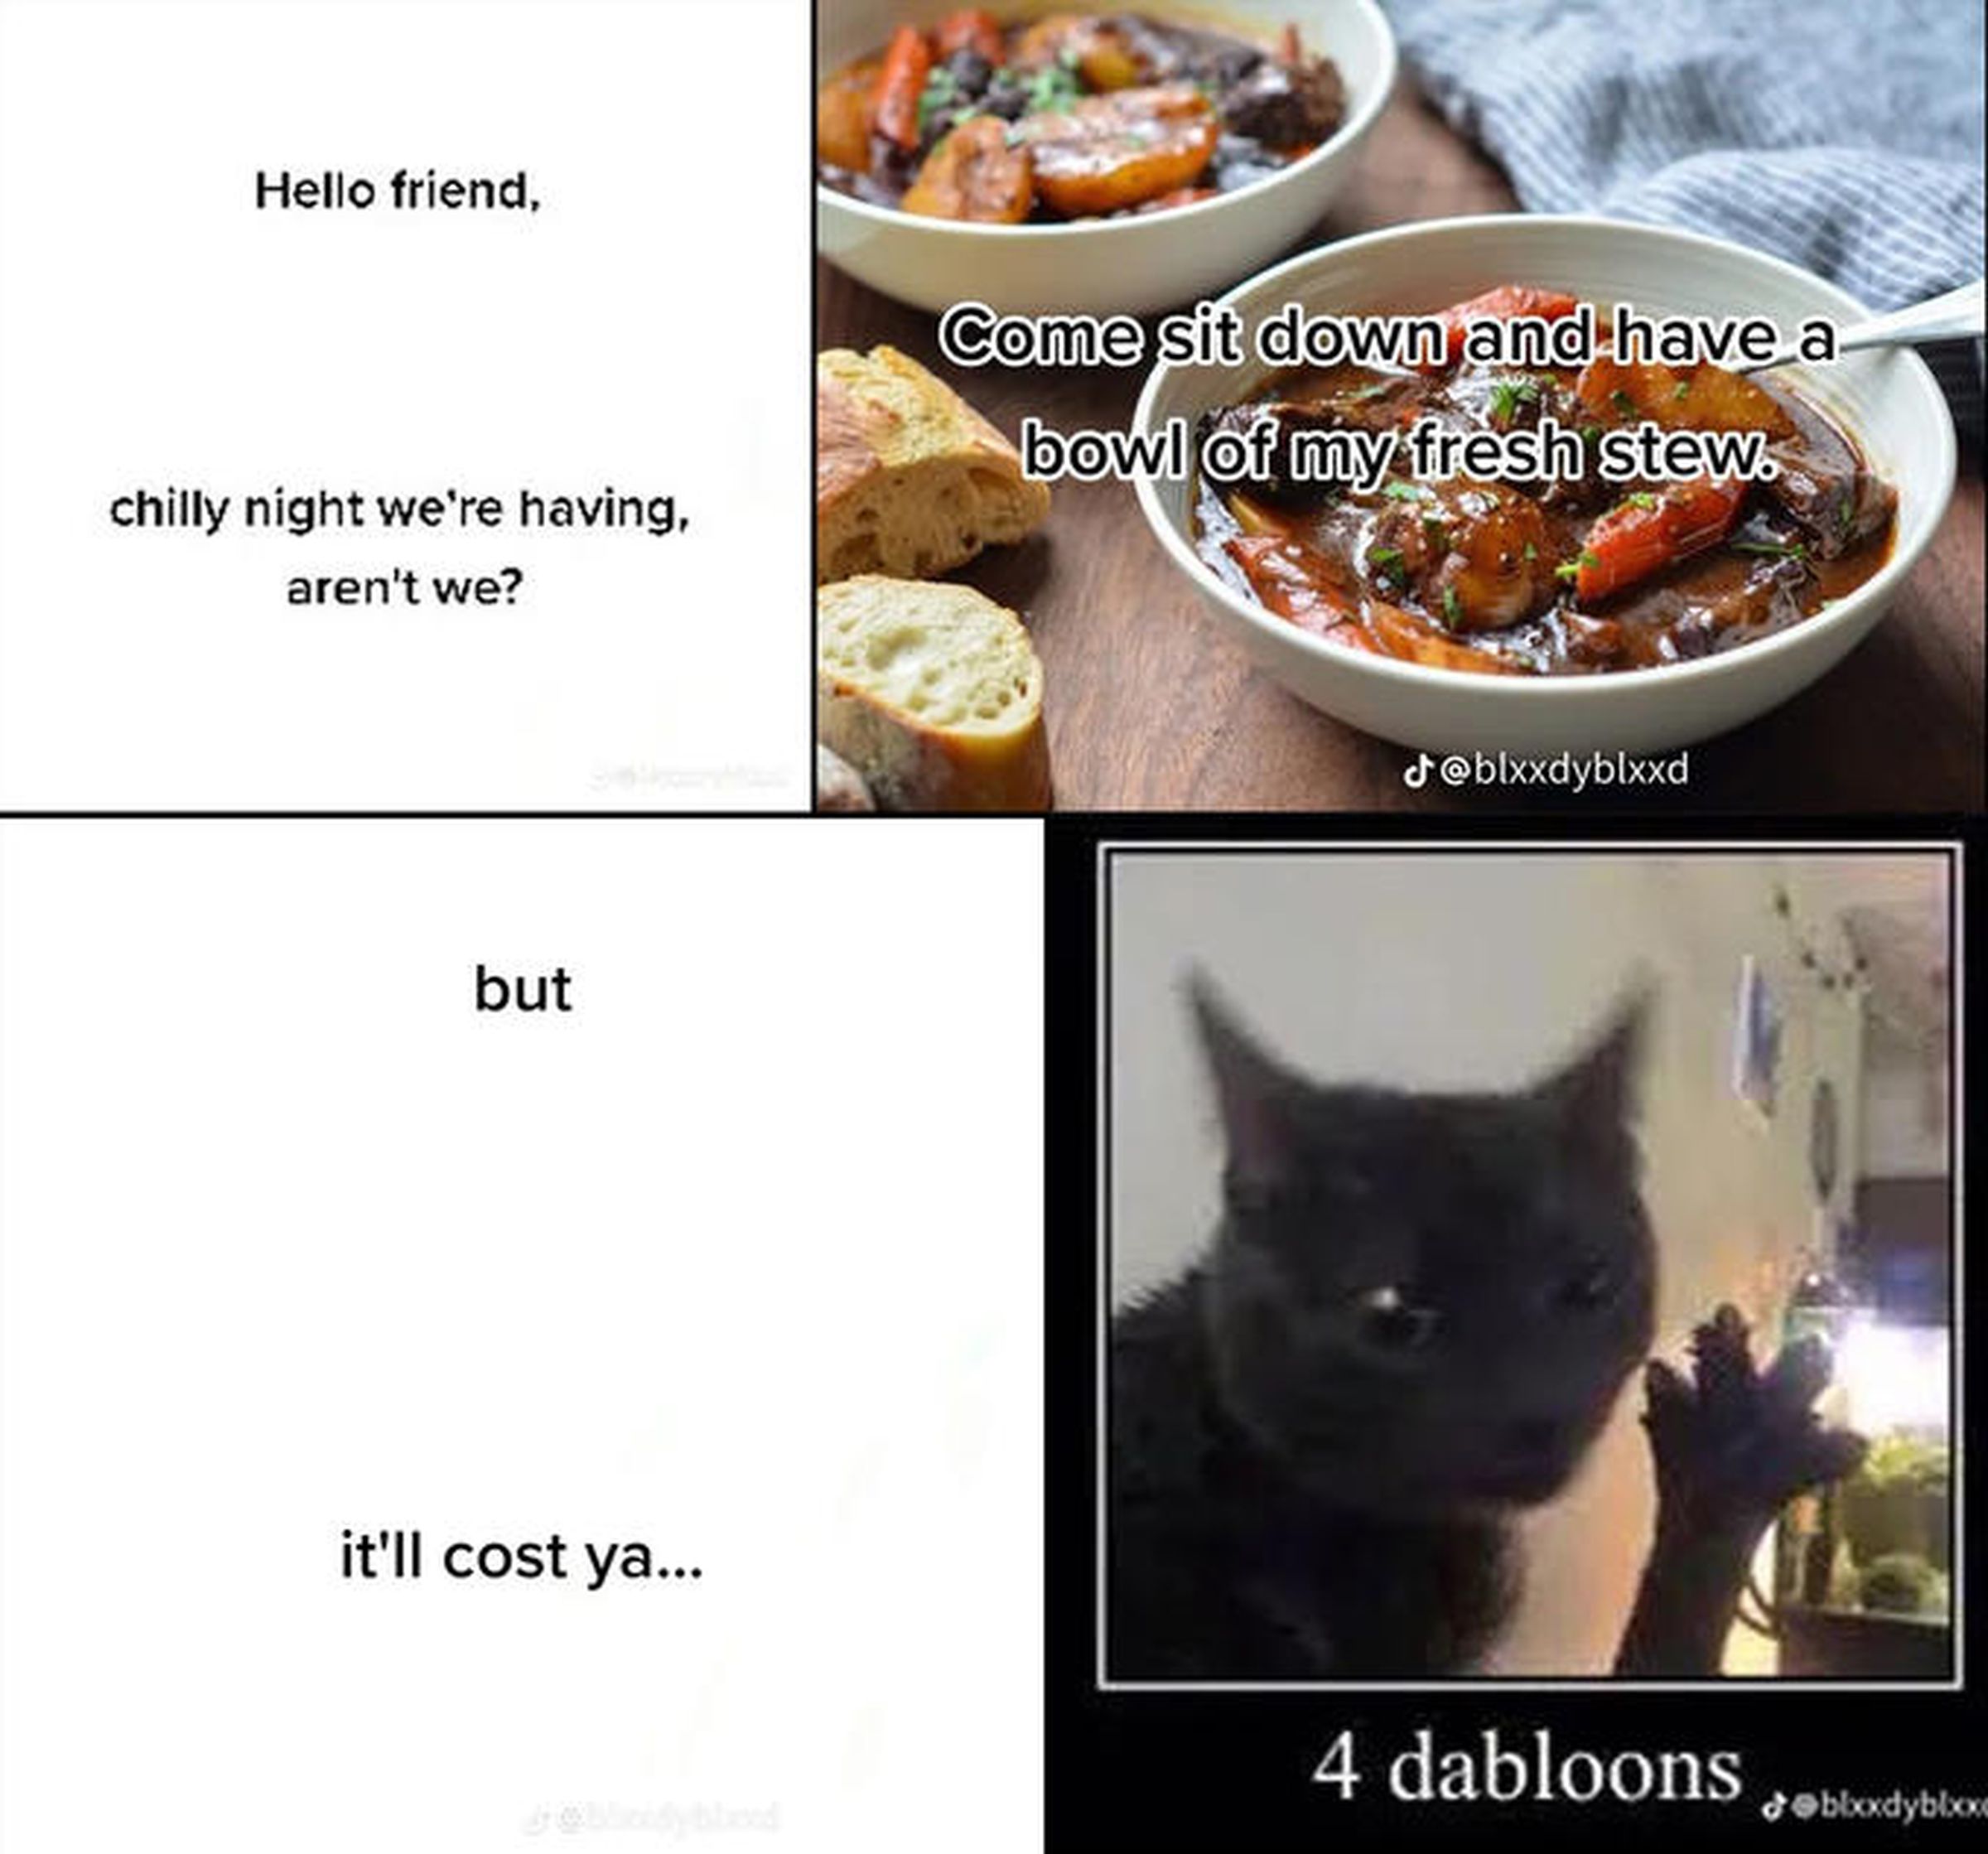 A four-panel meme in which a cat offers the user some stew in exchange for 'dabloons'